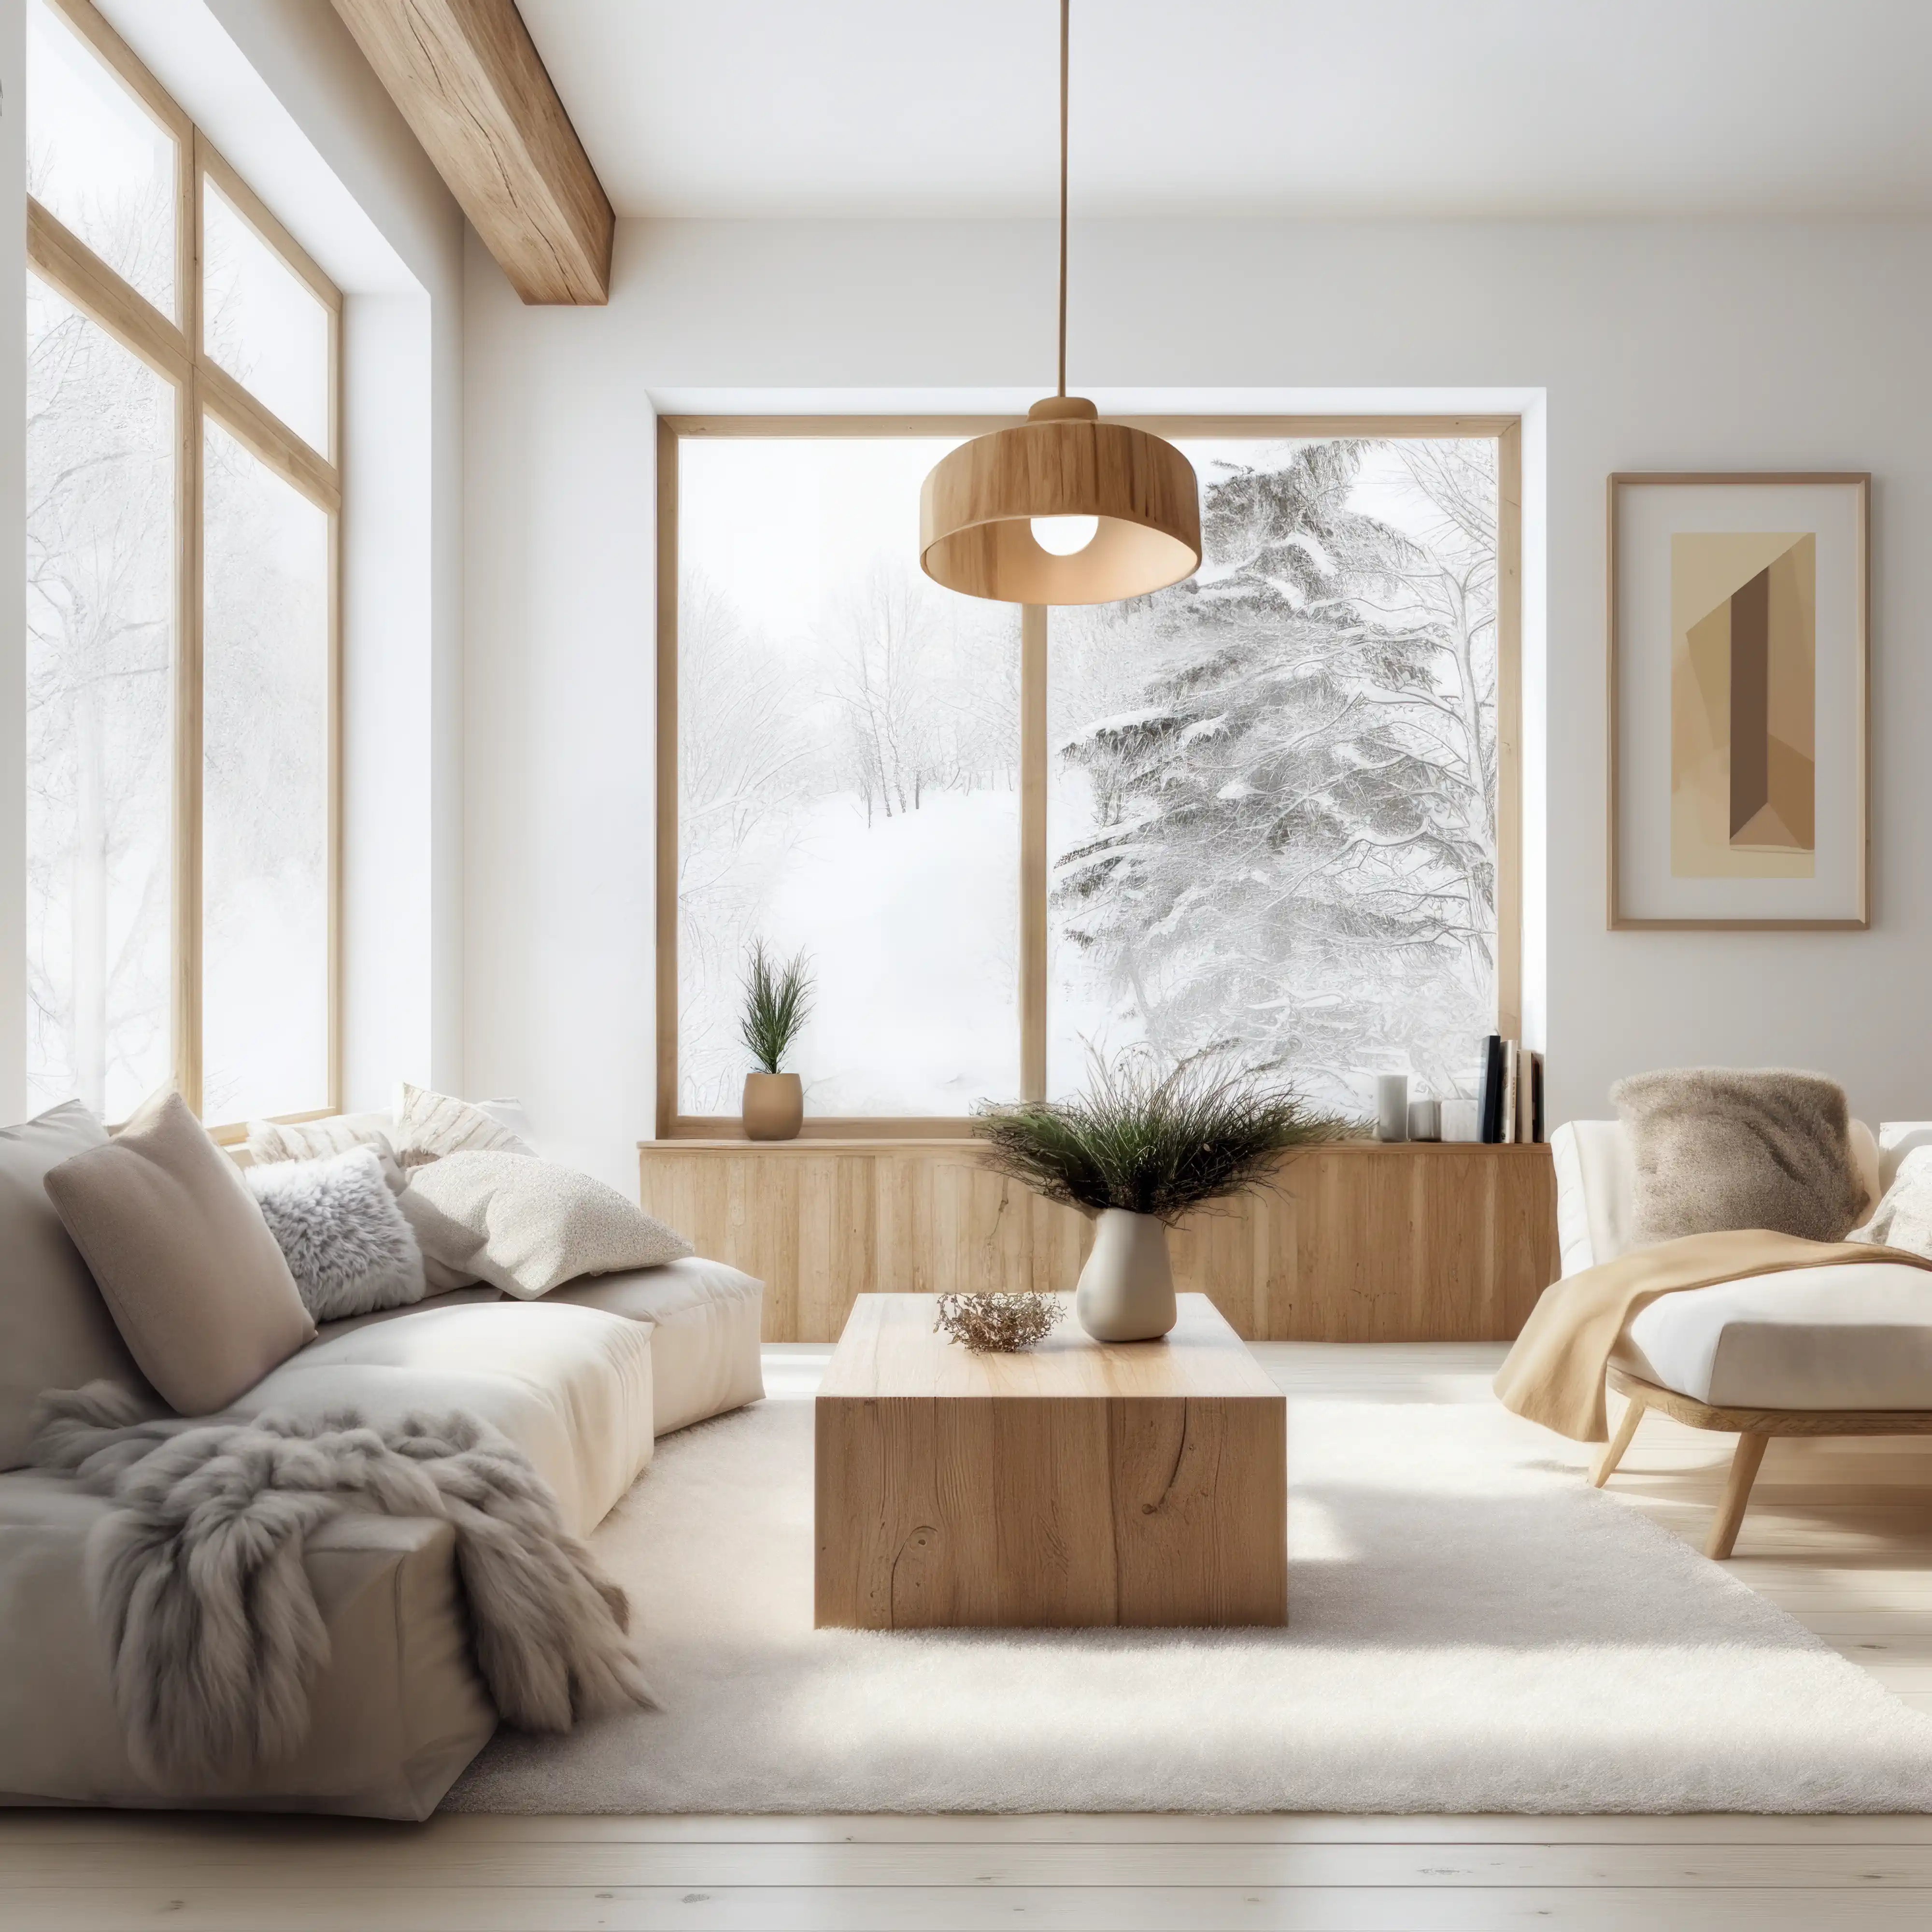 Cozy winter living room with a large window showcasing snowy trees, interior by Sarah Brown Design